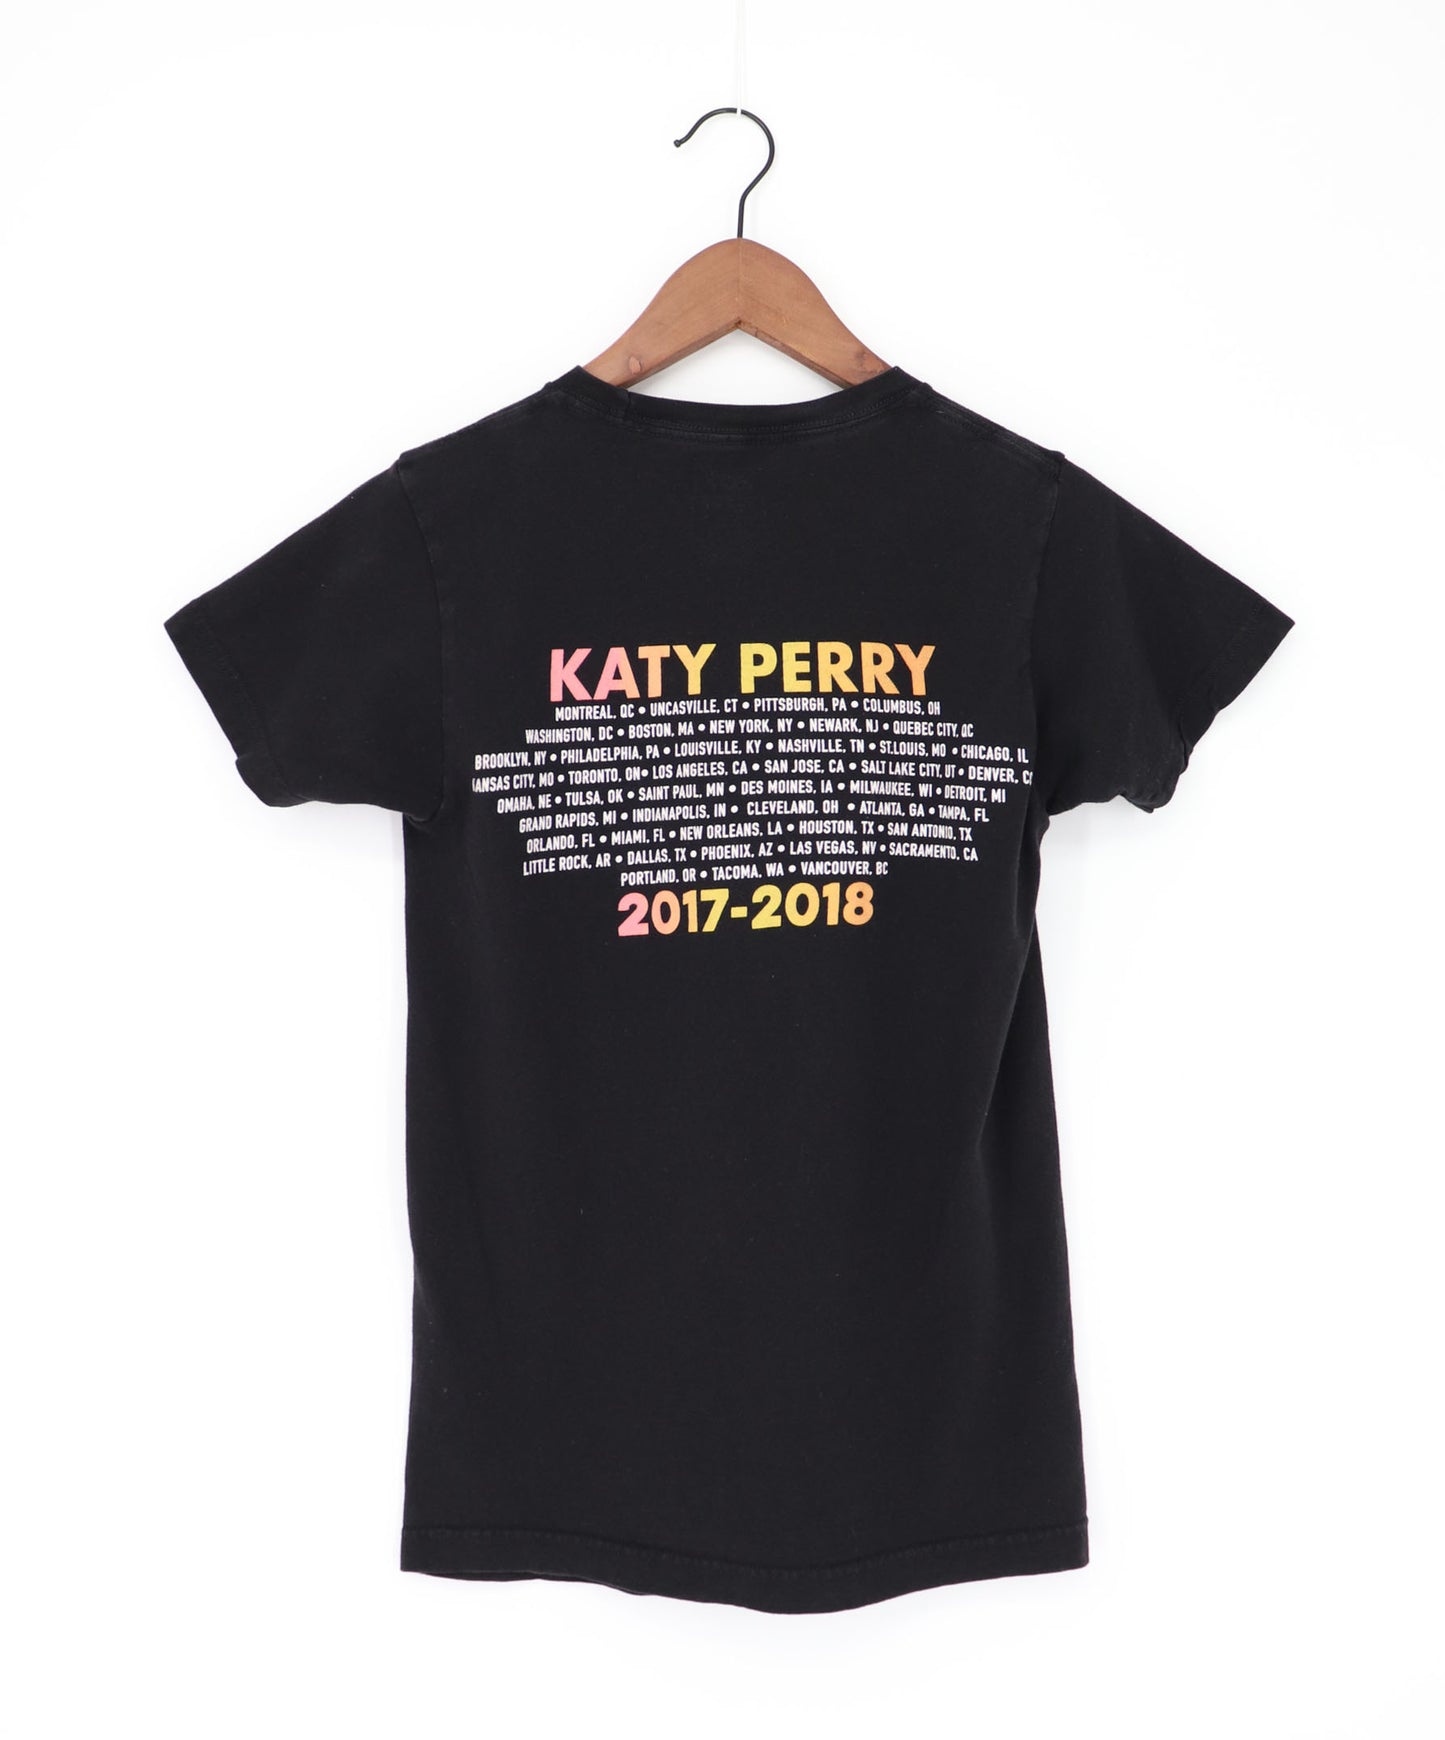 KATY PERRY WITNESS THE TOUR 2017-18